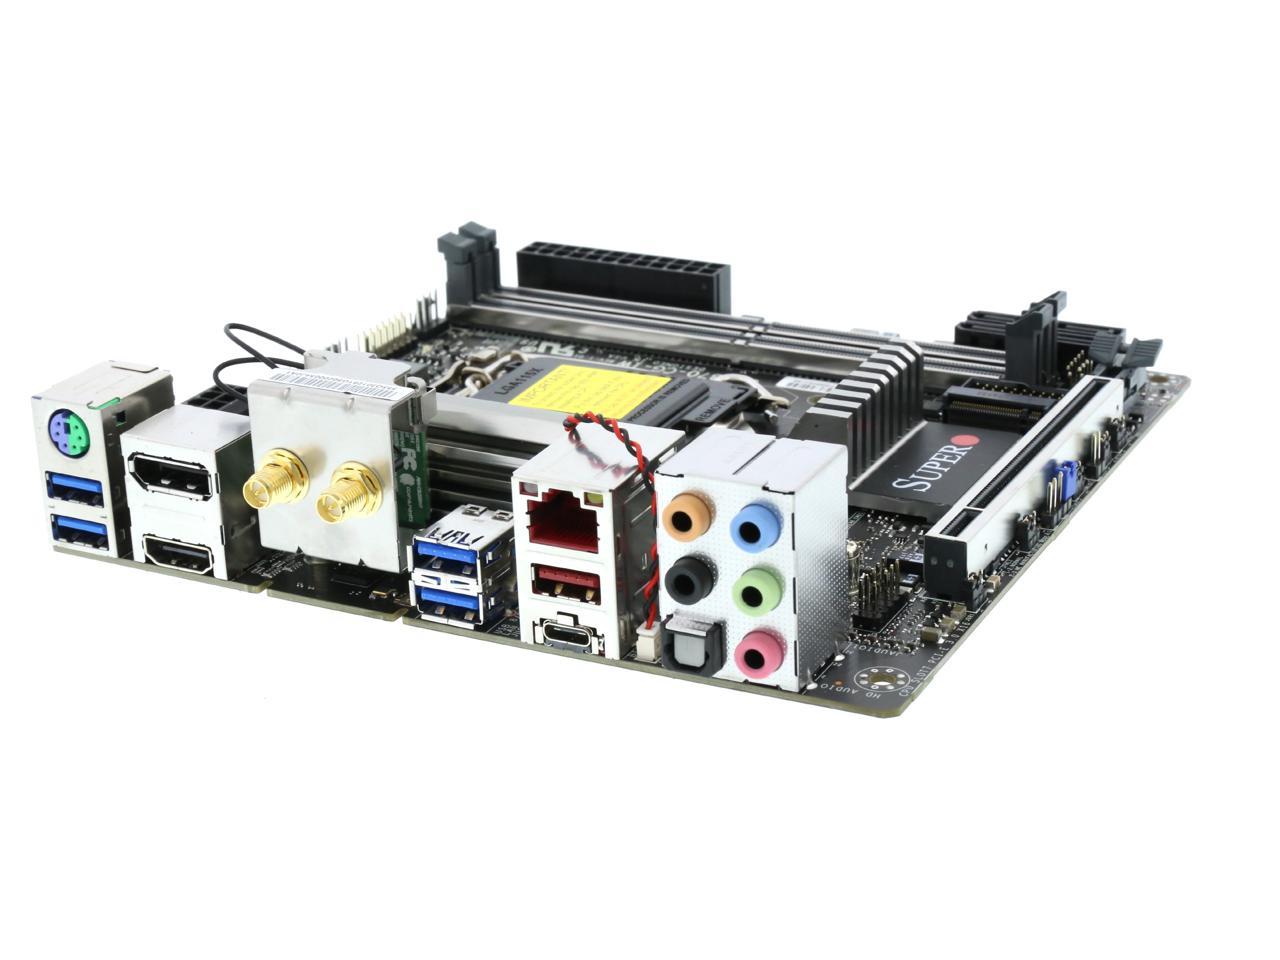 Supermicro MBD-C7Z370-CG-IW-O Motherboard